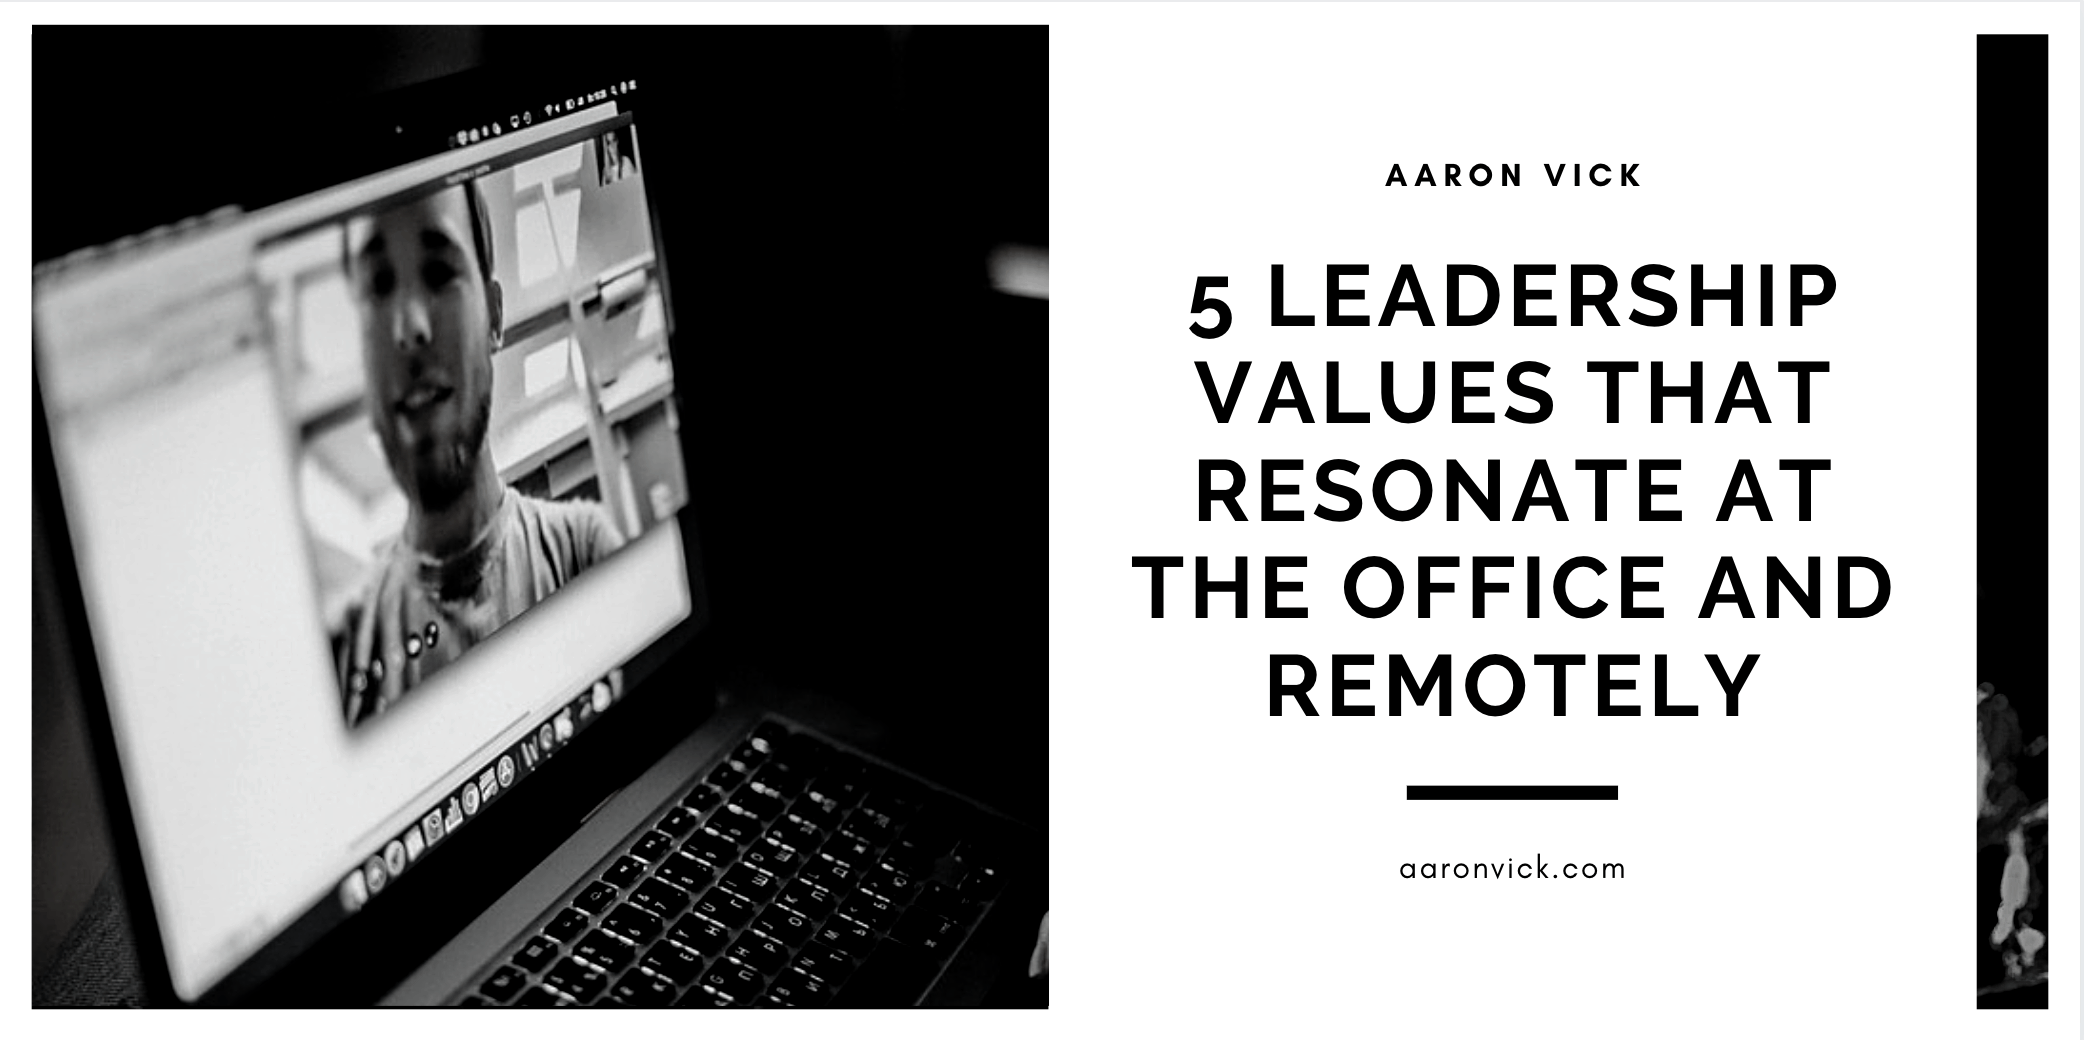 Aaron Vick - 5 Leadership Values That Resonate at the Office and Remotely